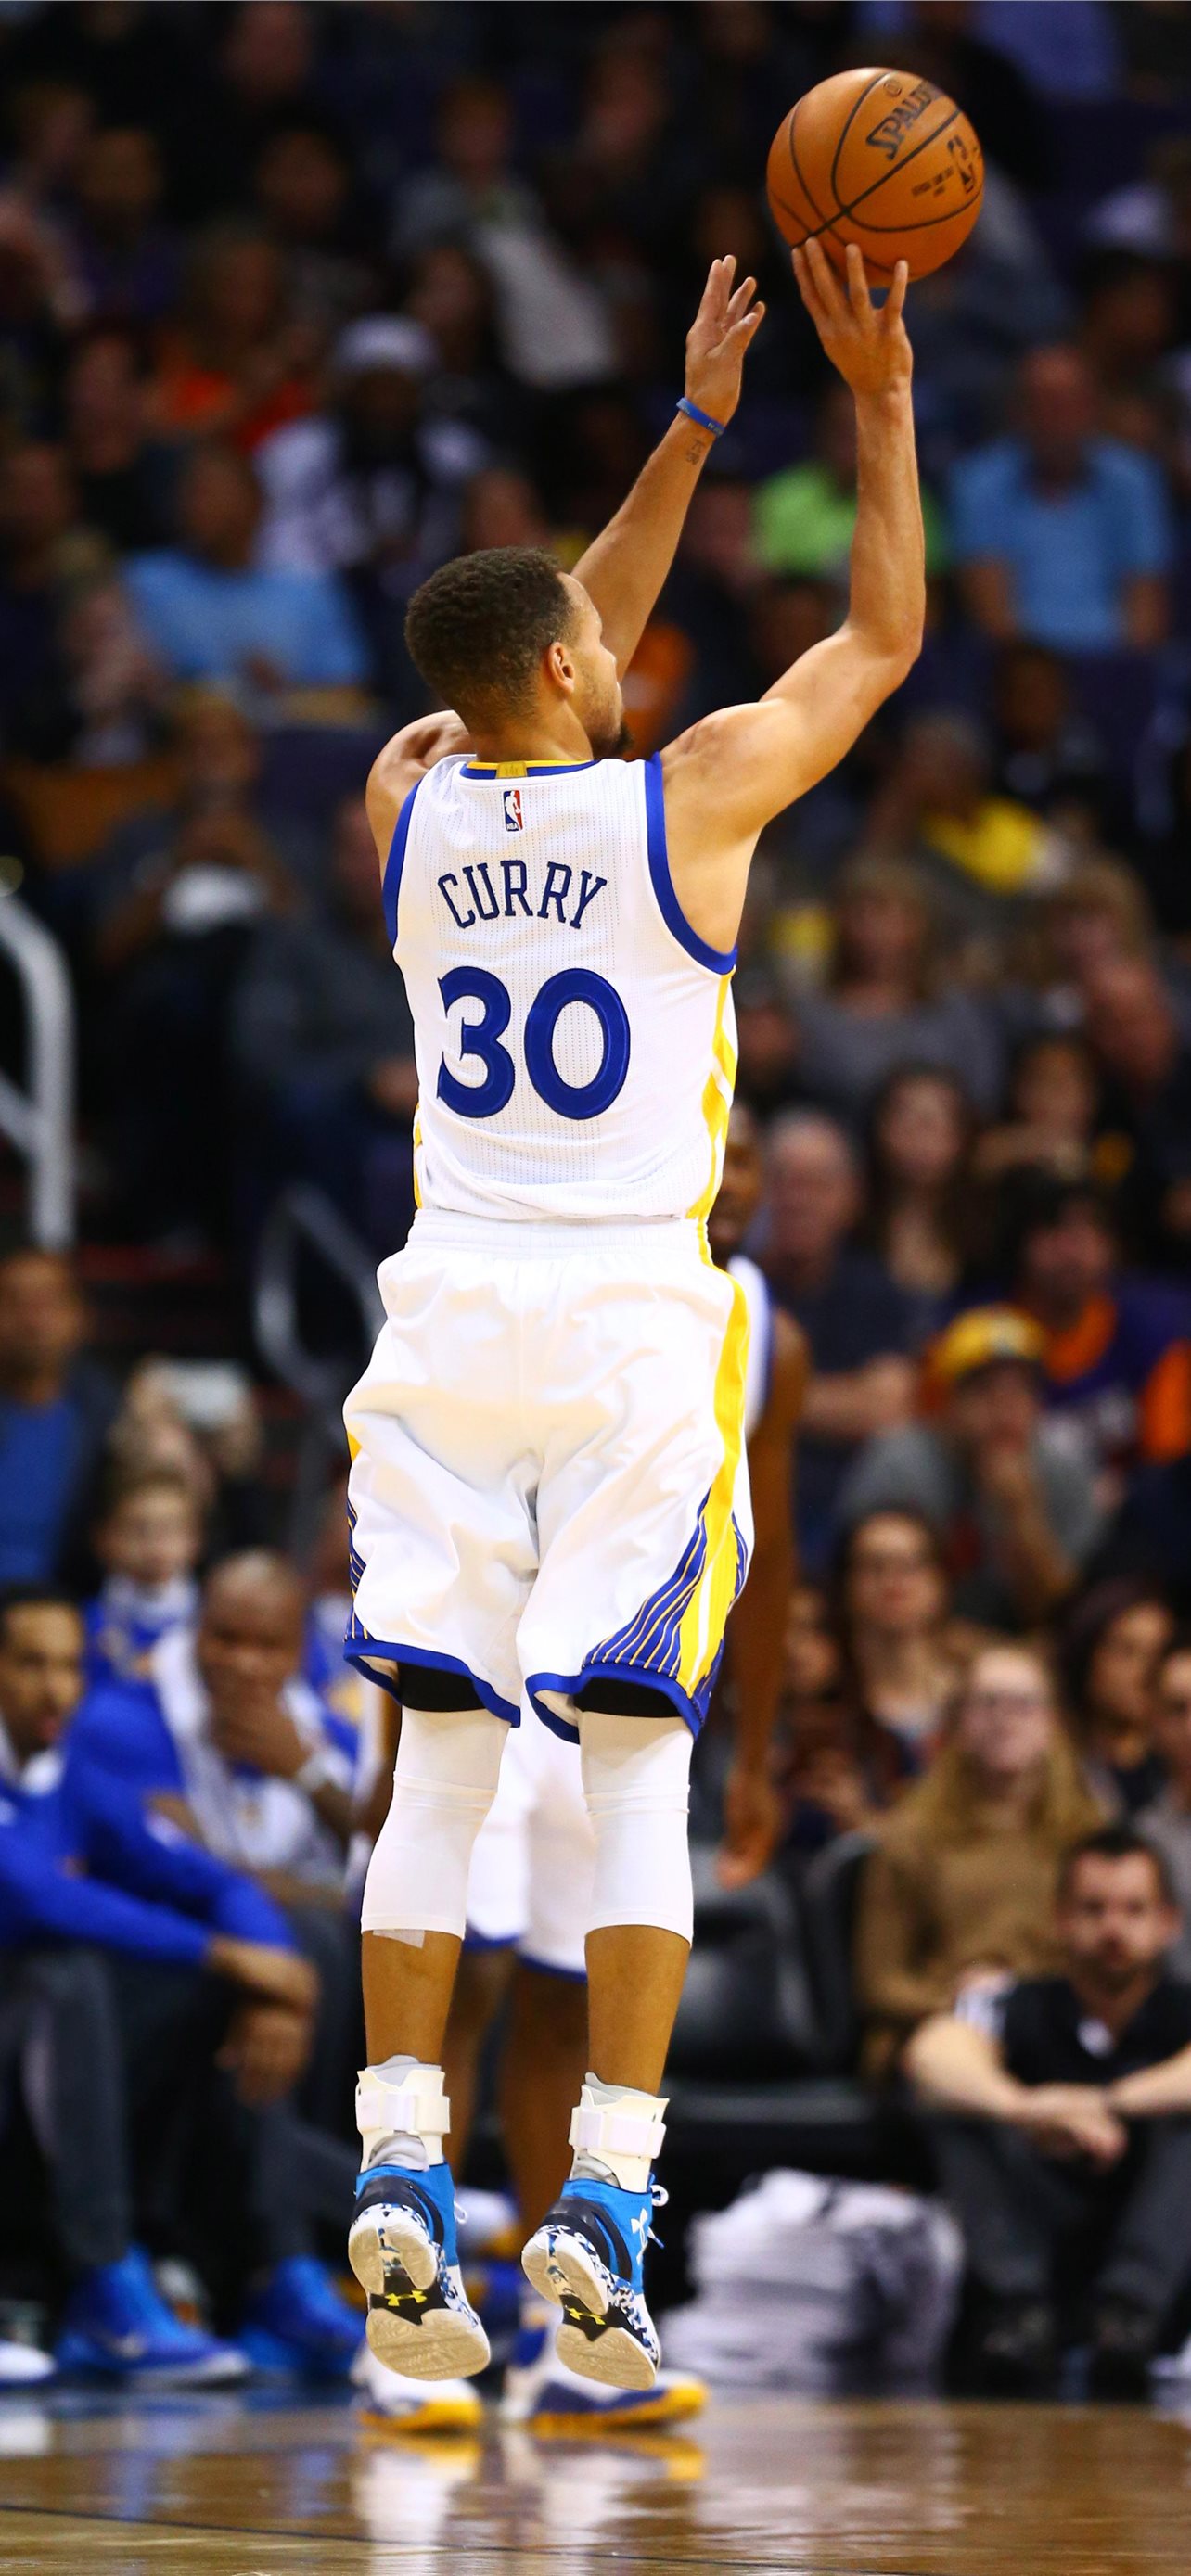 Stephen Curry Wallpaper for Iphone  Live Wallpaper HD  Stephen curry  wallpaper Curry wallpaper Stephen curry wallpaper hd